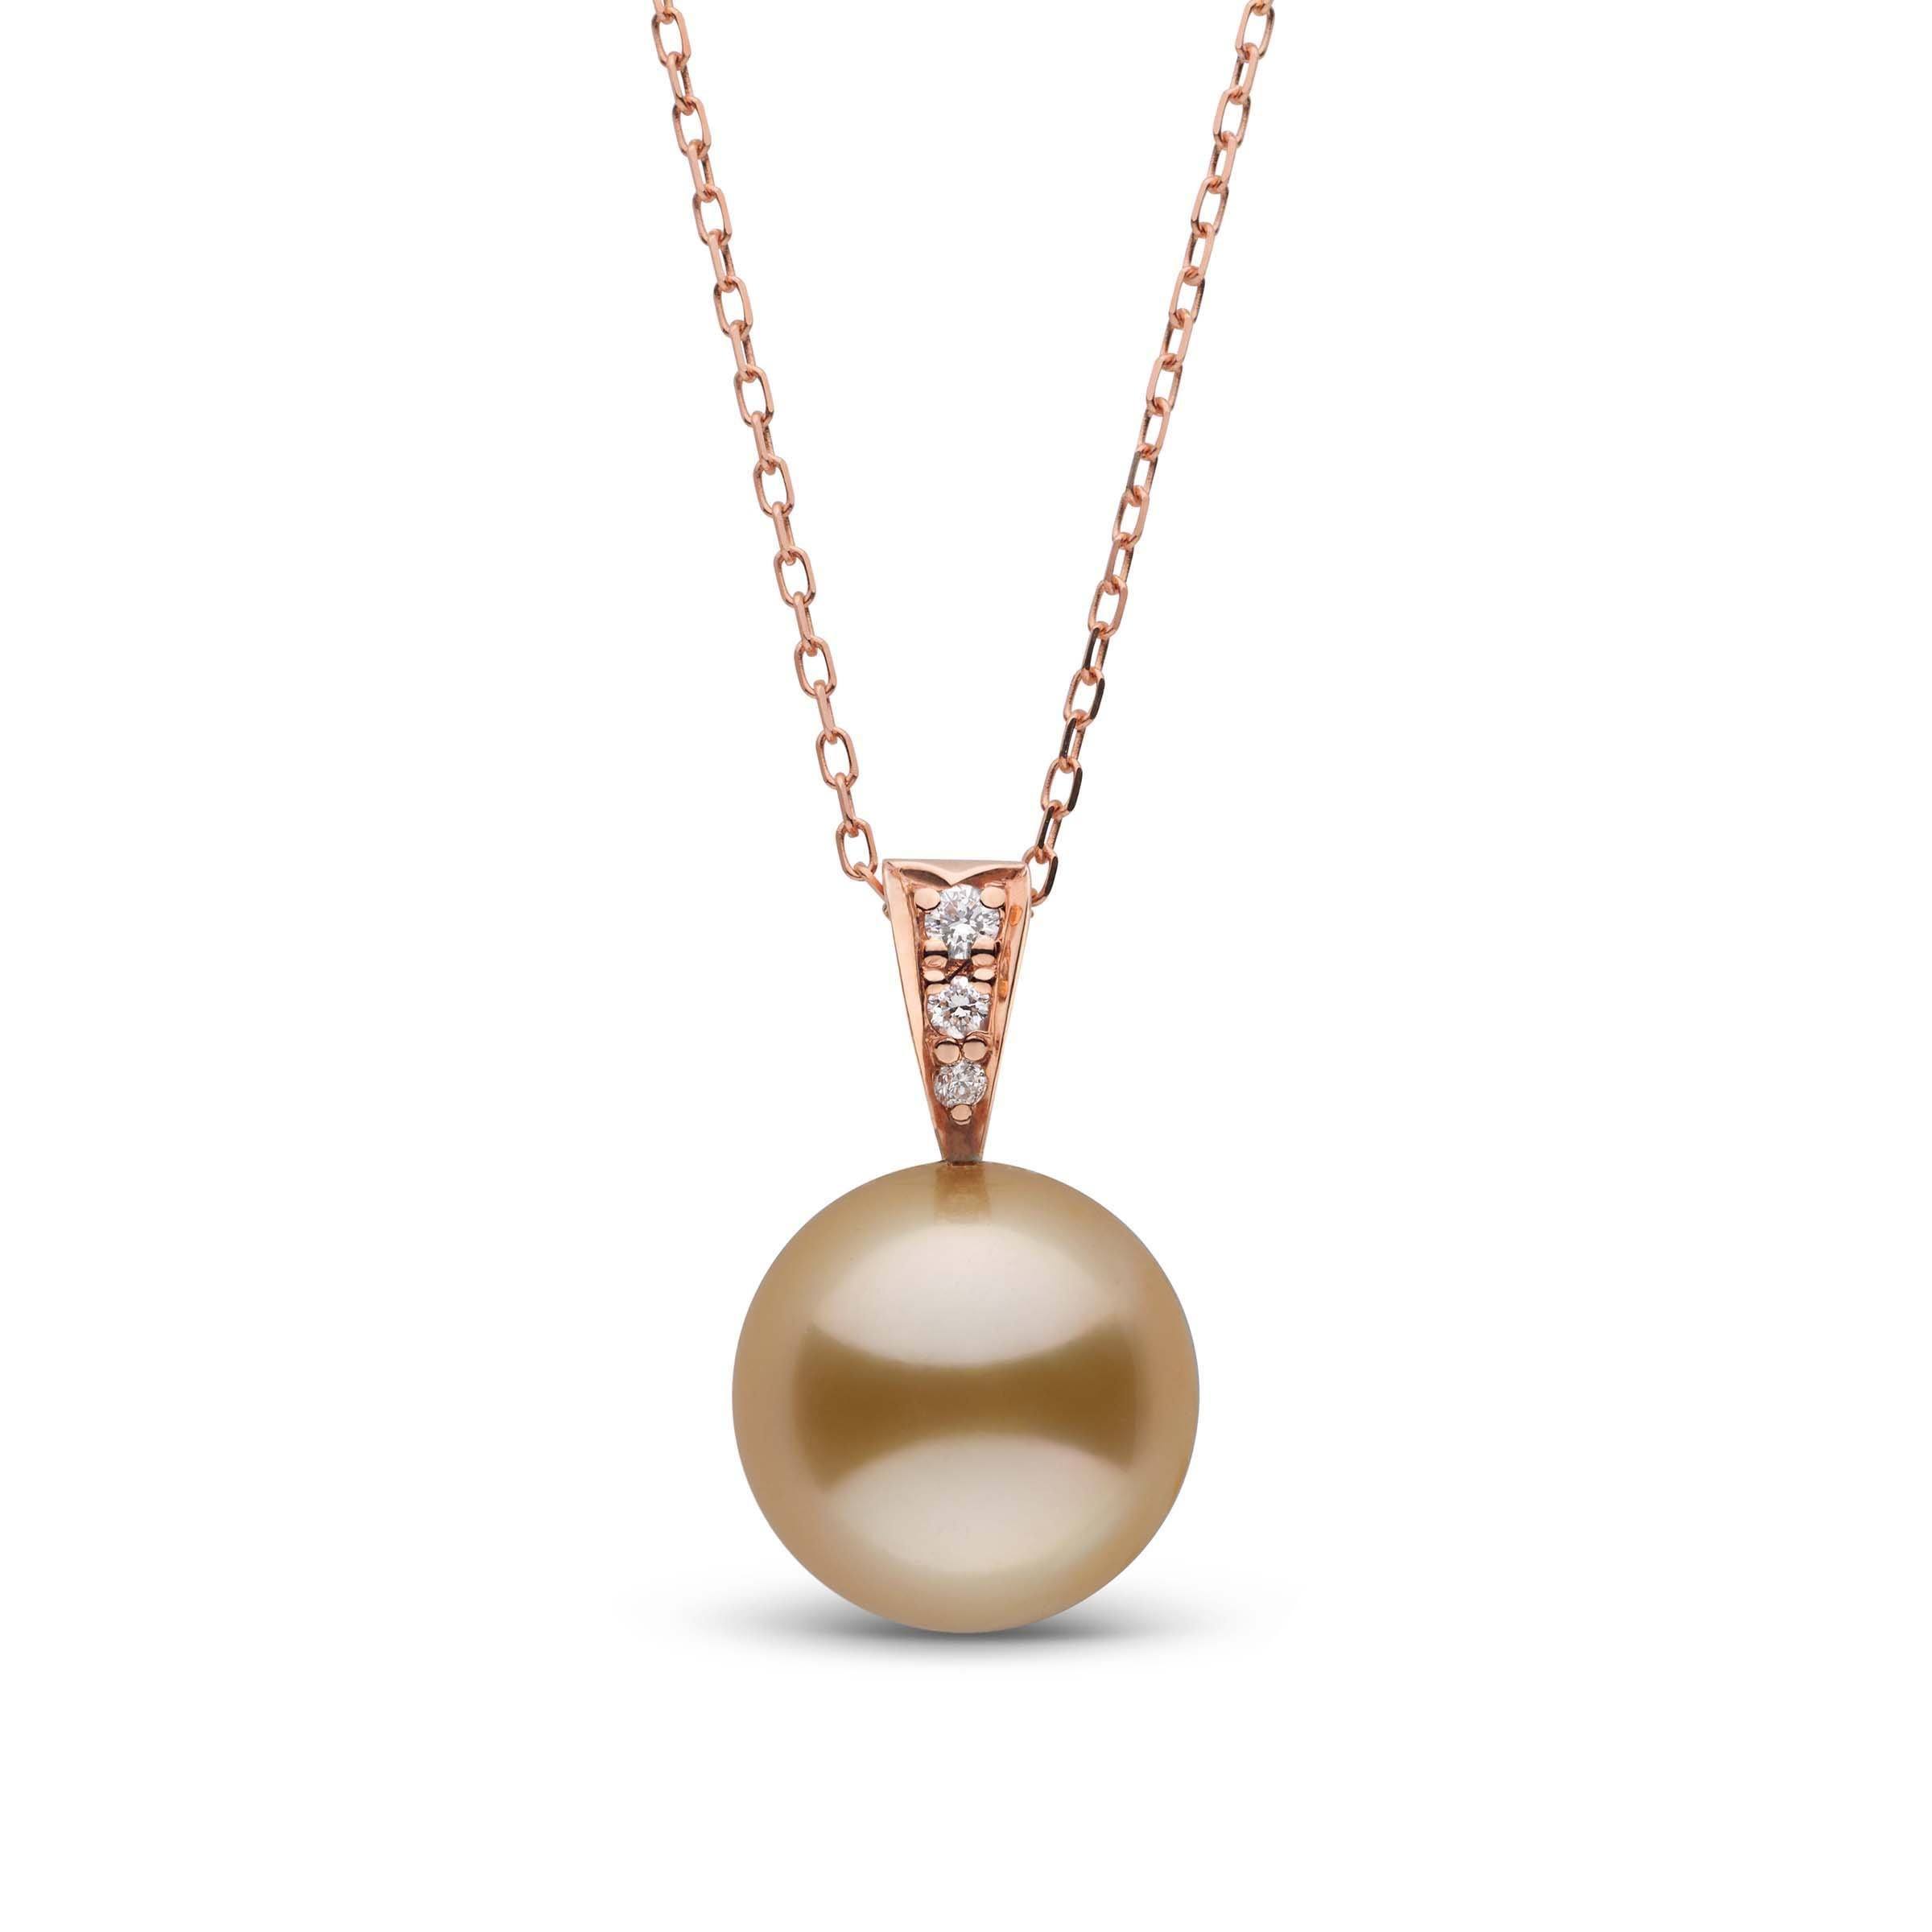 Desire Collection Golden 10.0-11.0 mm South Sea Pearl and Diamond Pendant